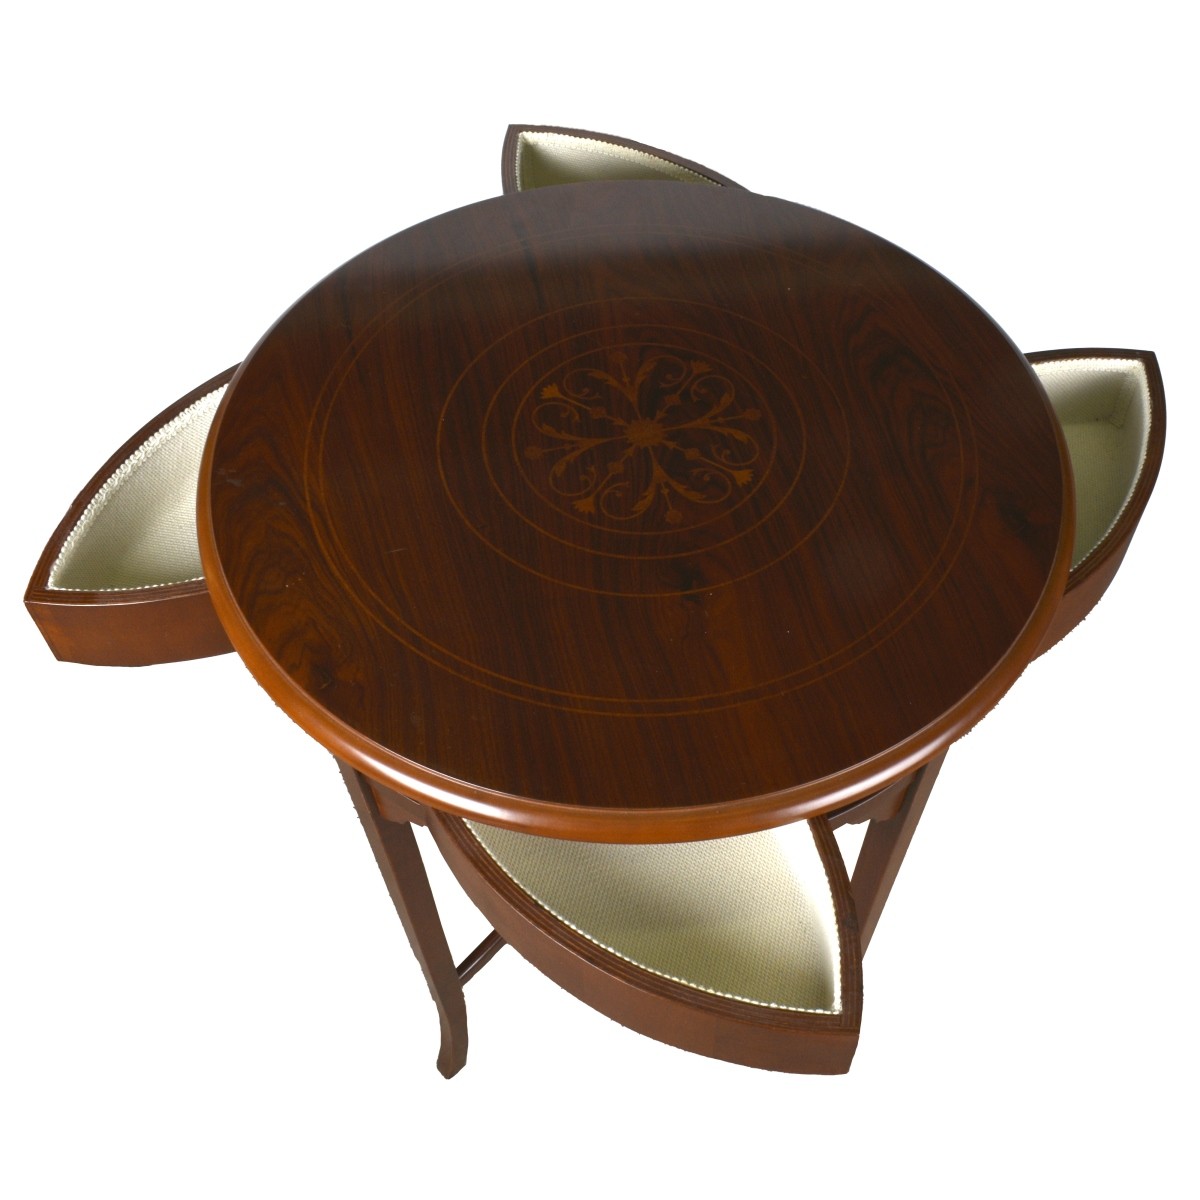 Vintage Inlaid Wooden Round Table